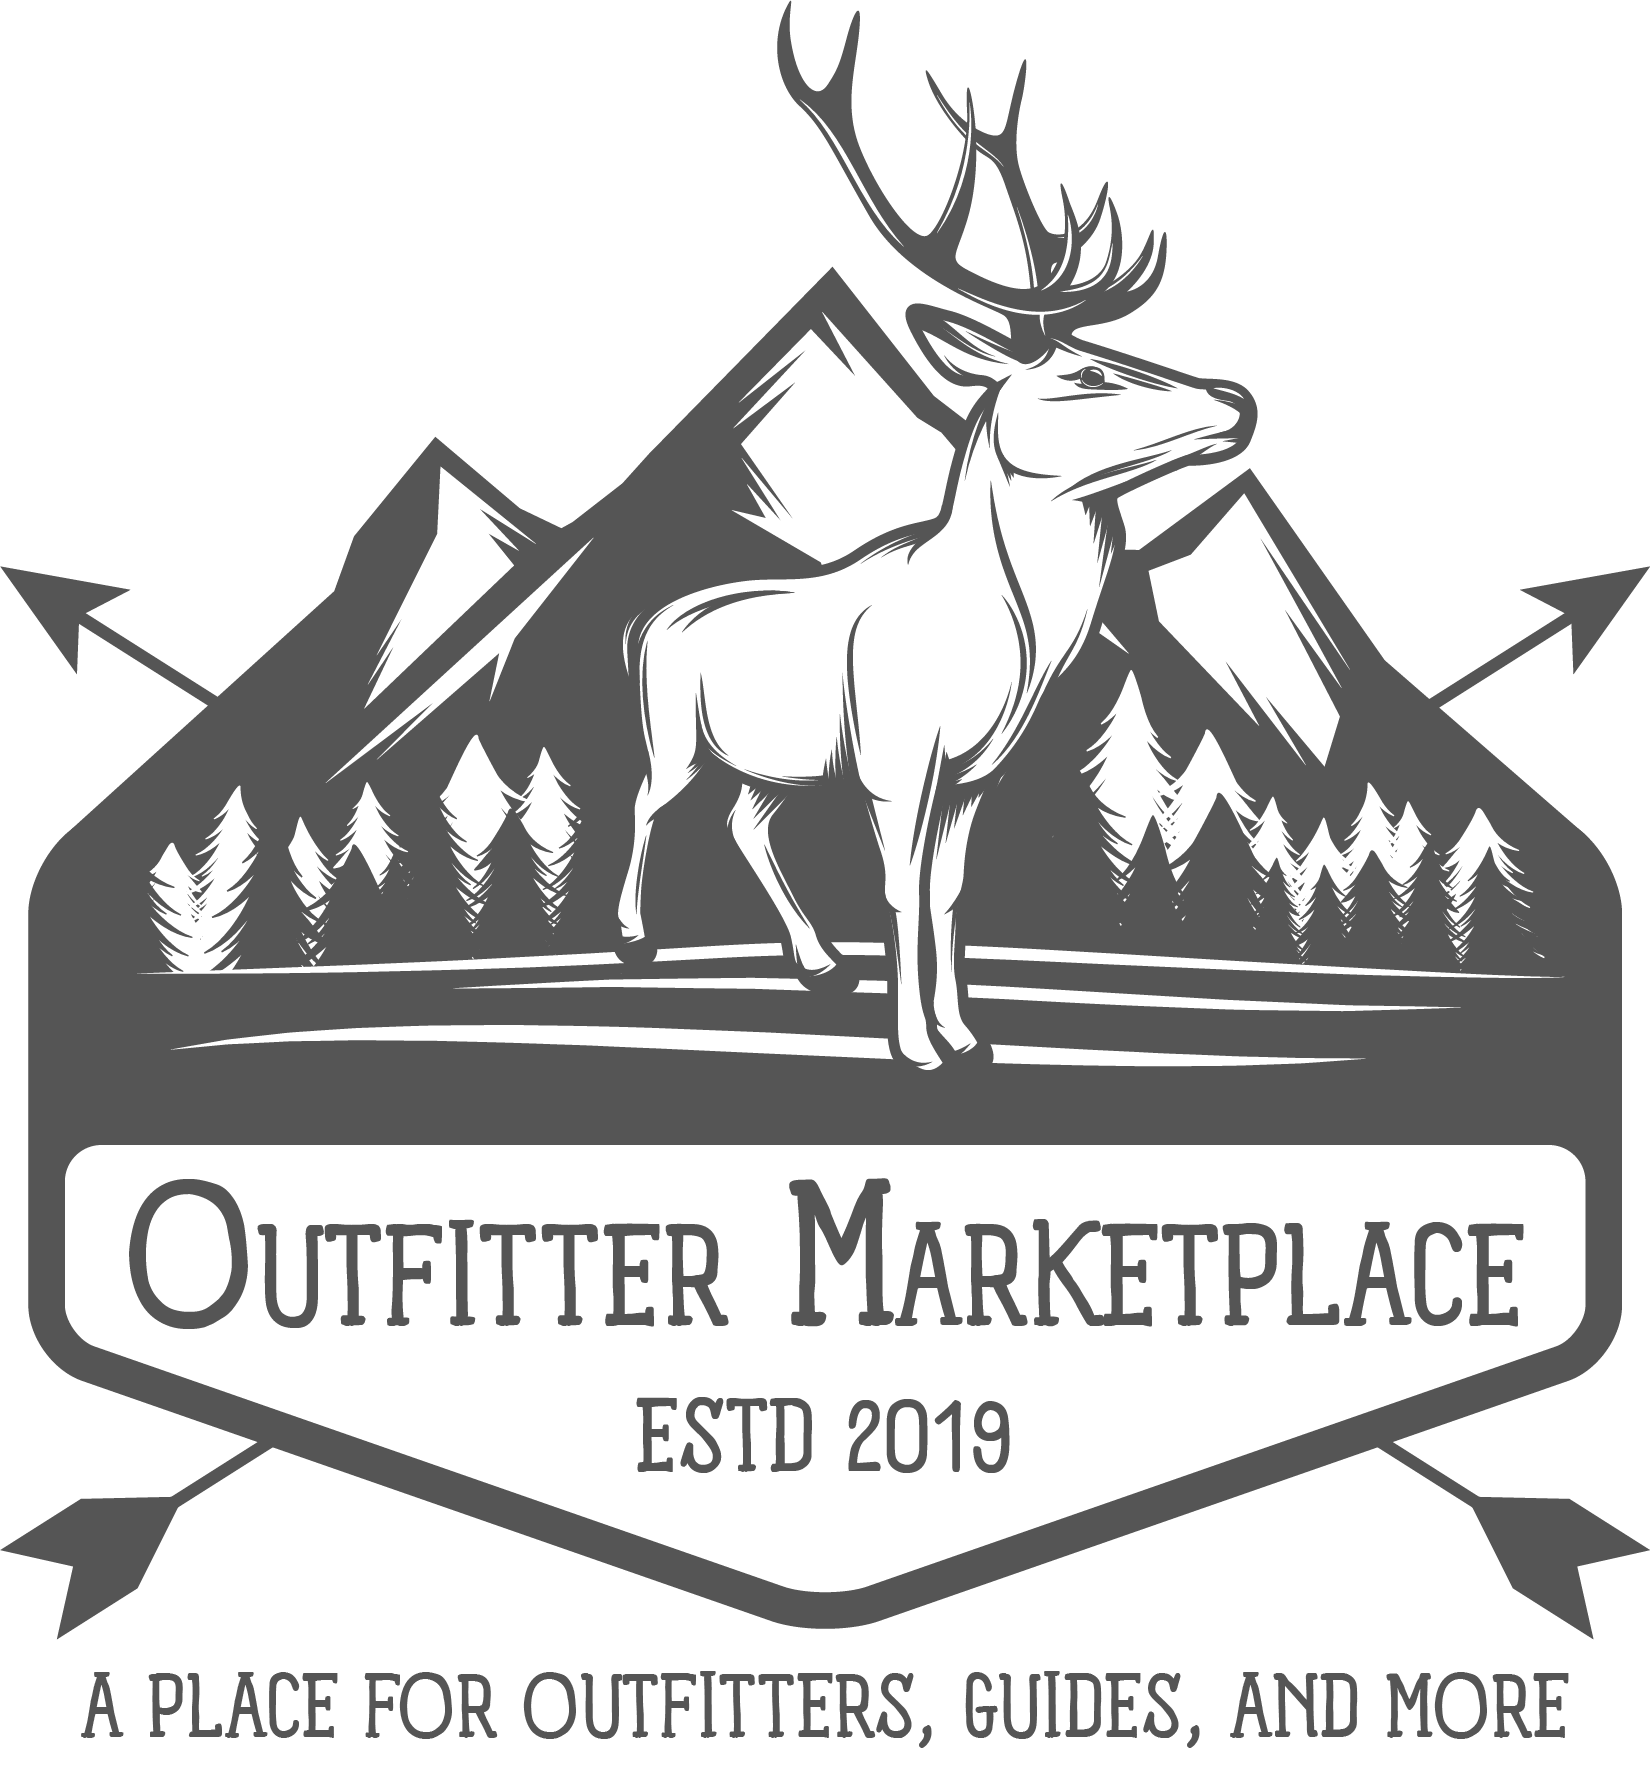 The Outfitter Marketplace